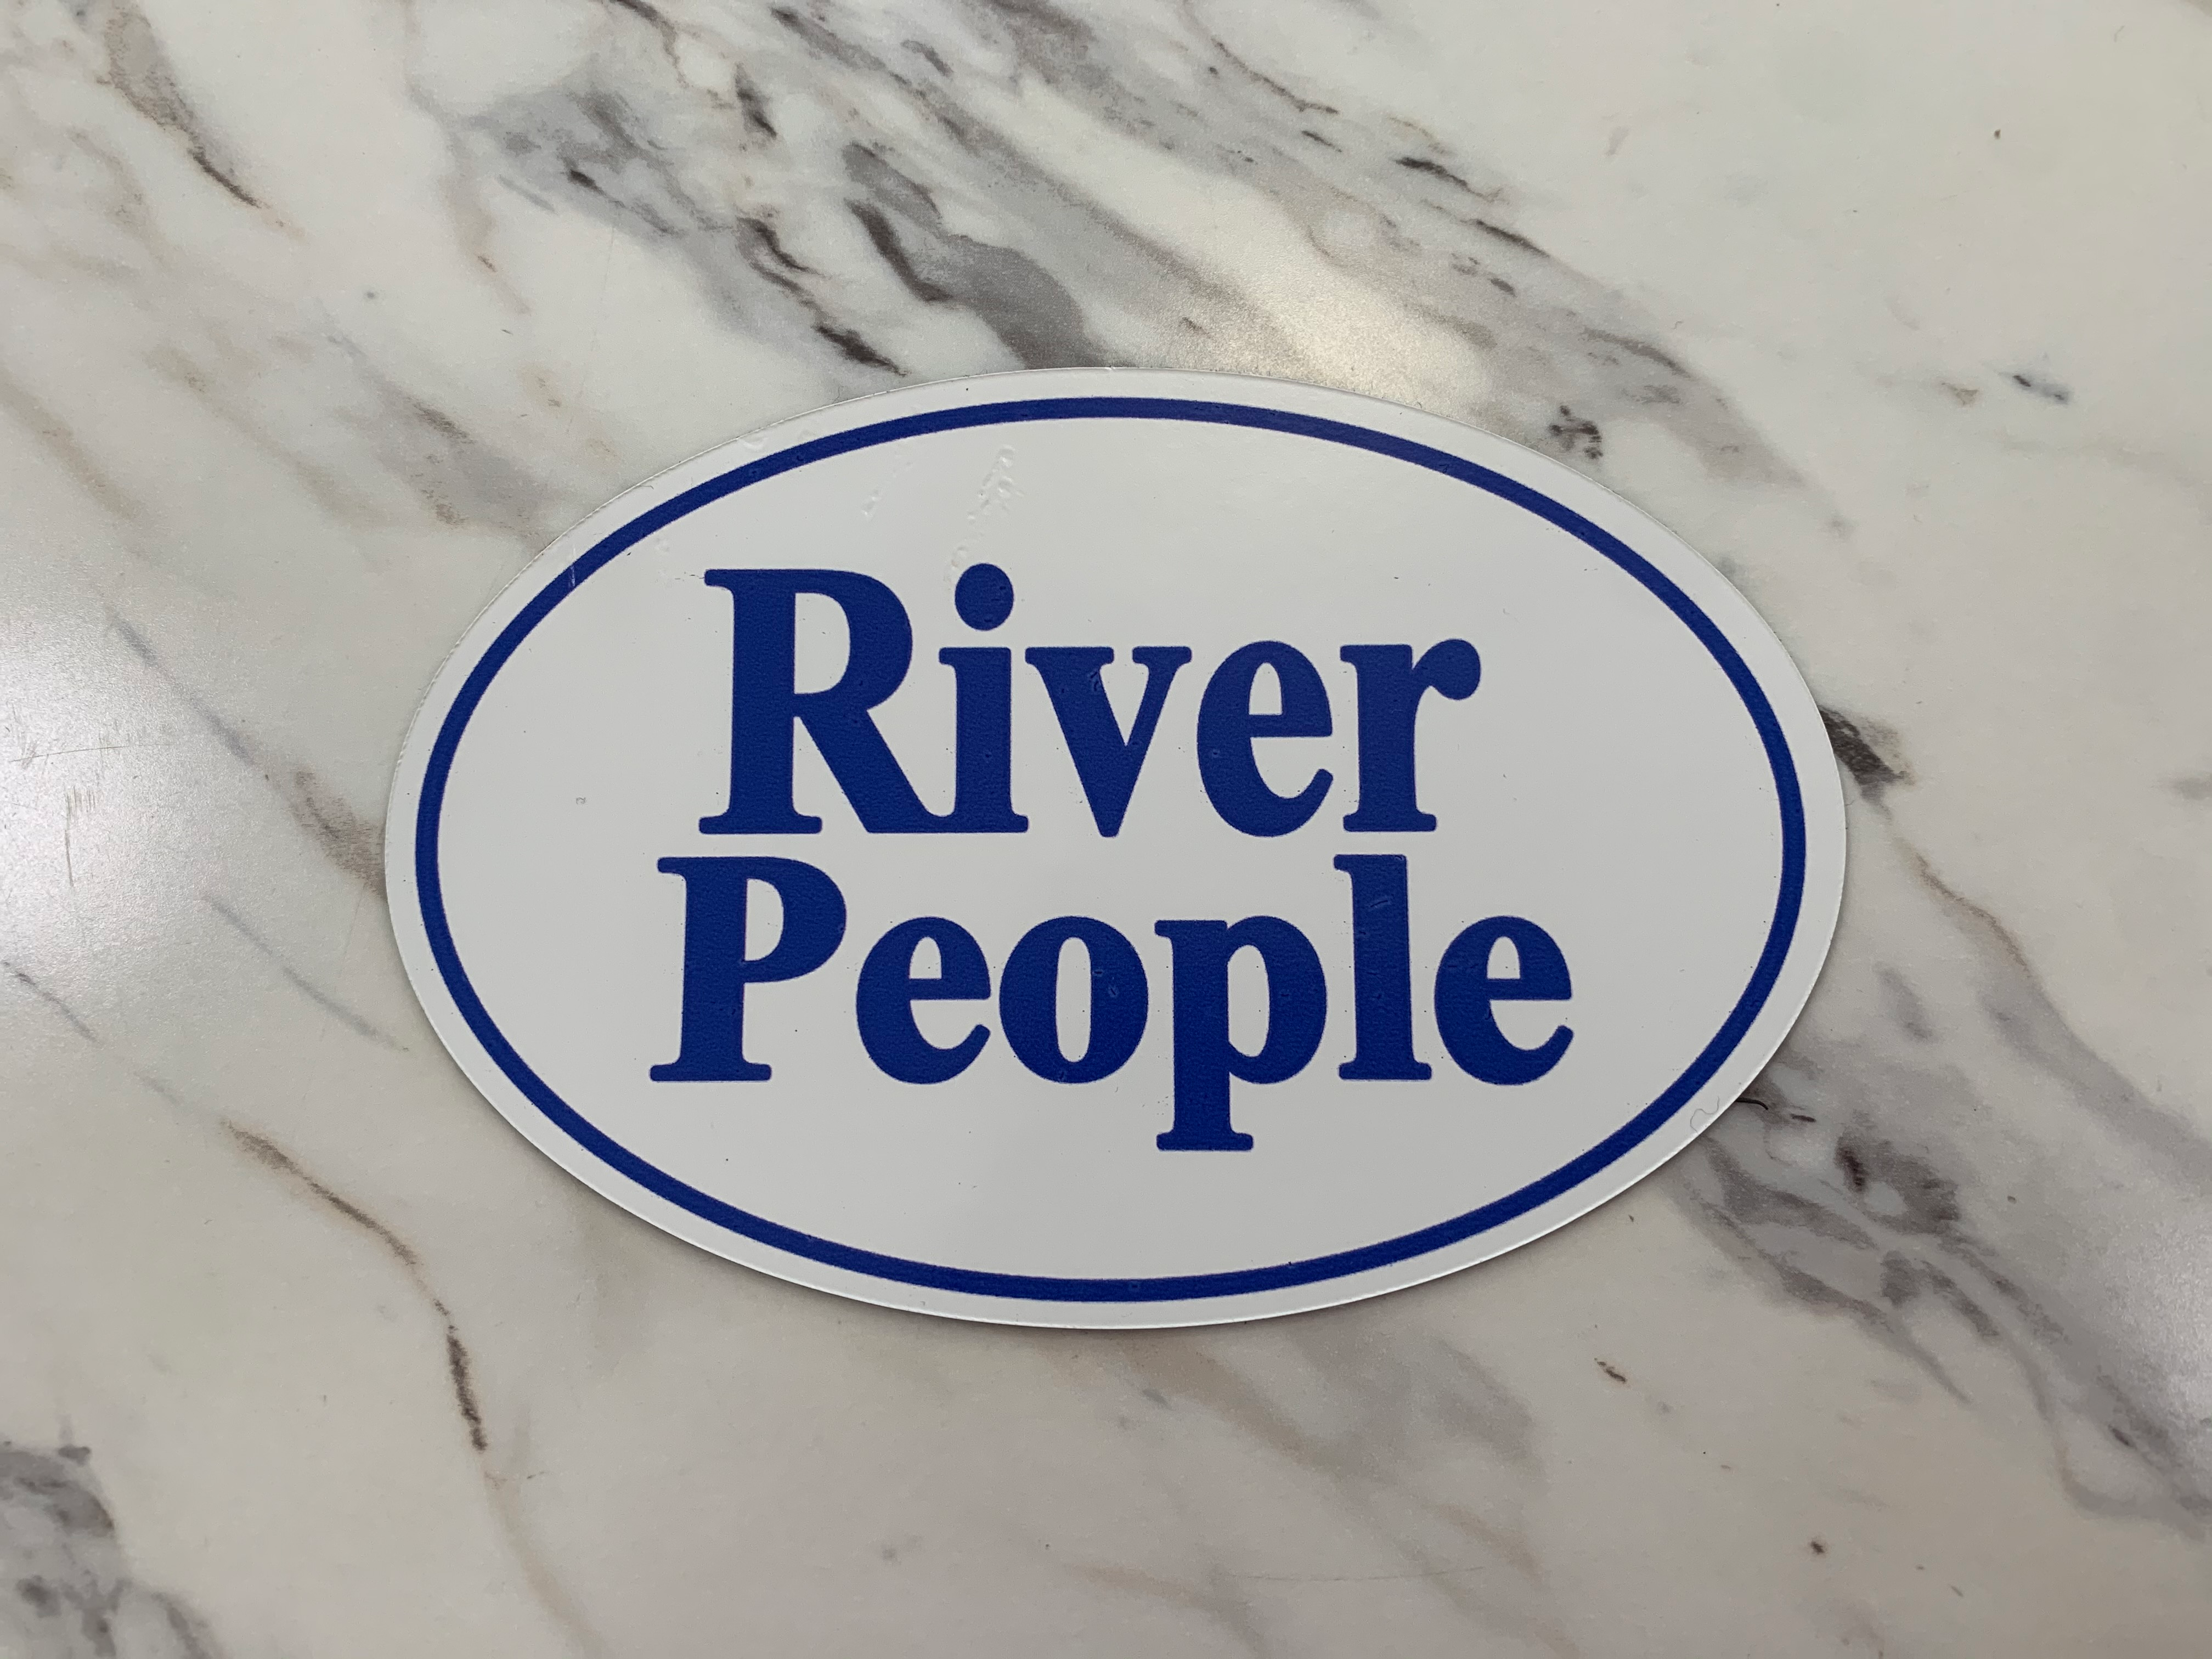 River People Oval Magnet Decal for your car . It sticks to metal but not glass. 